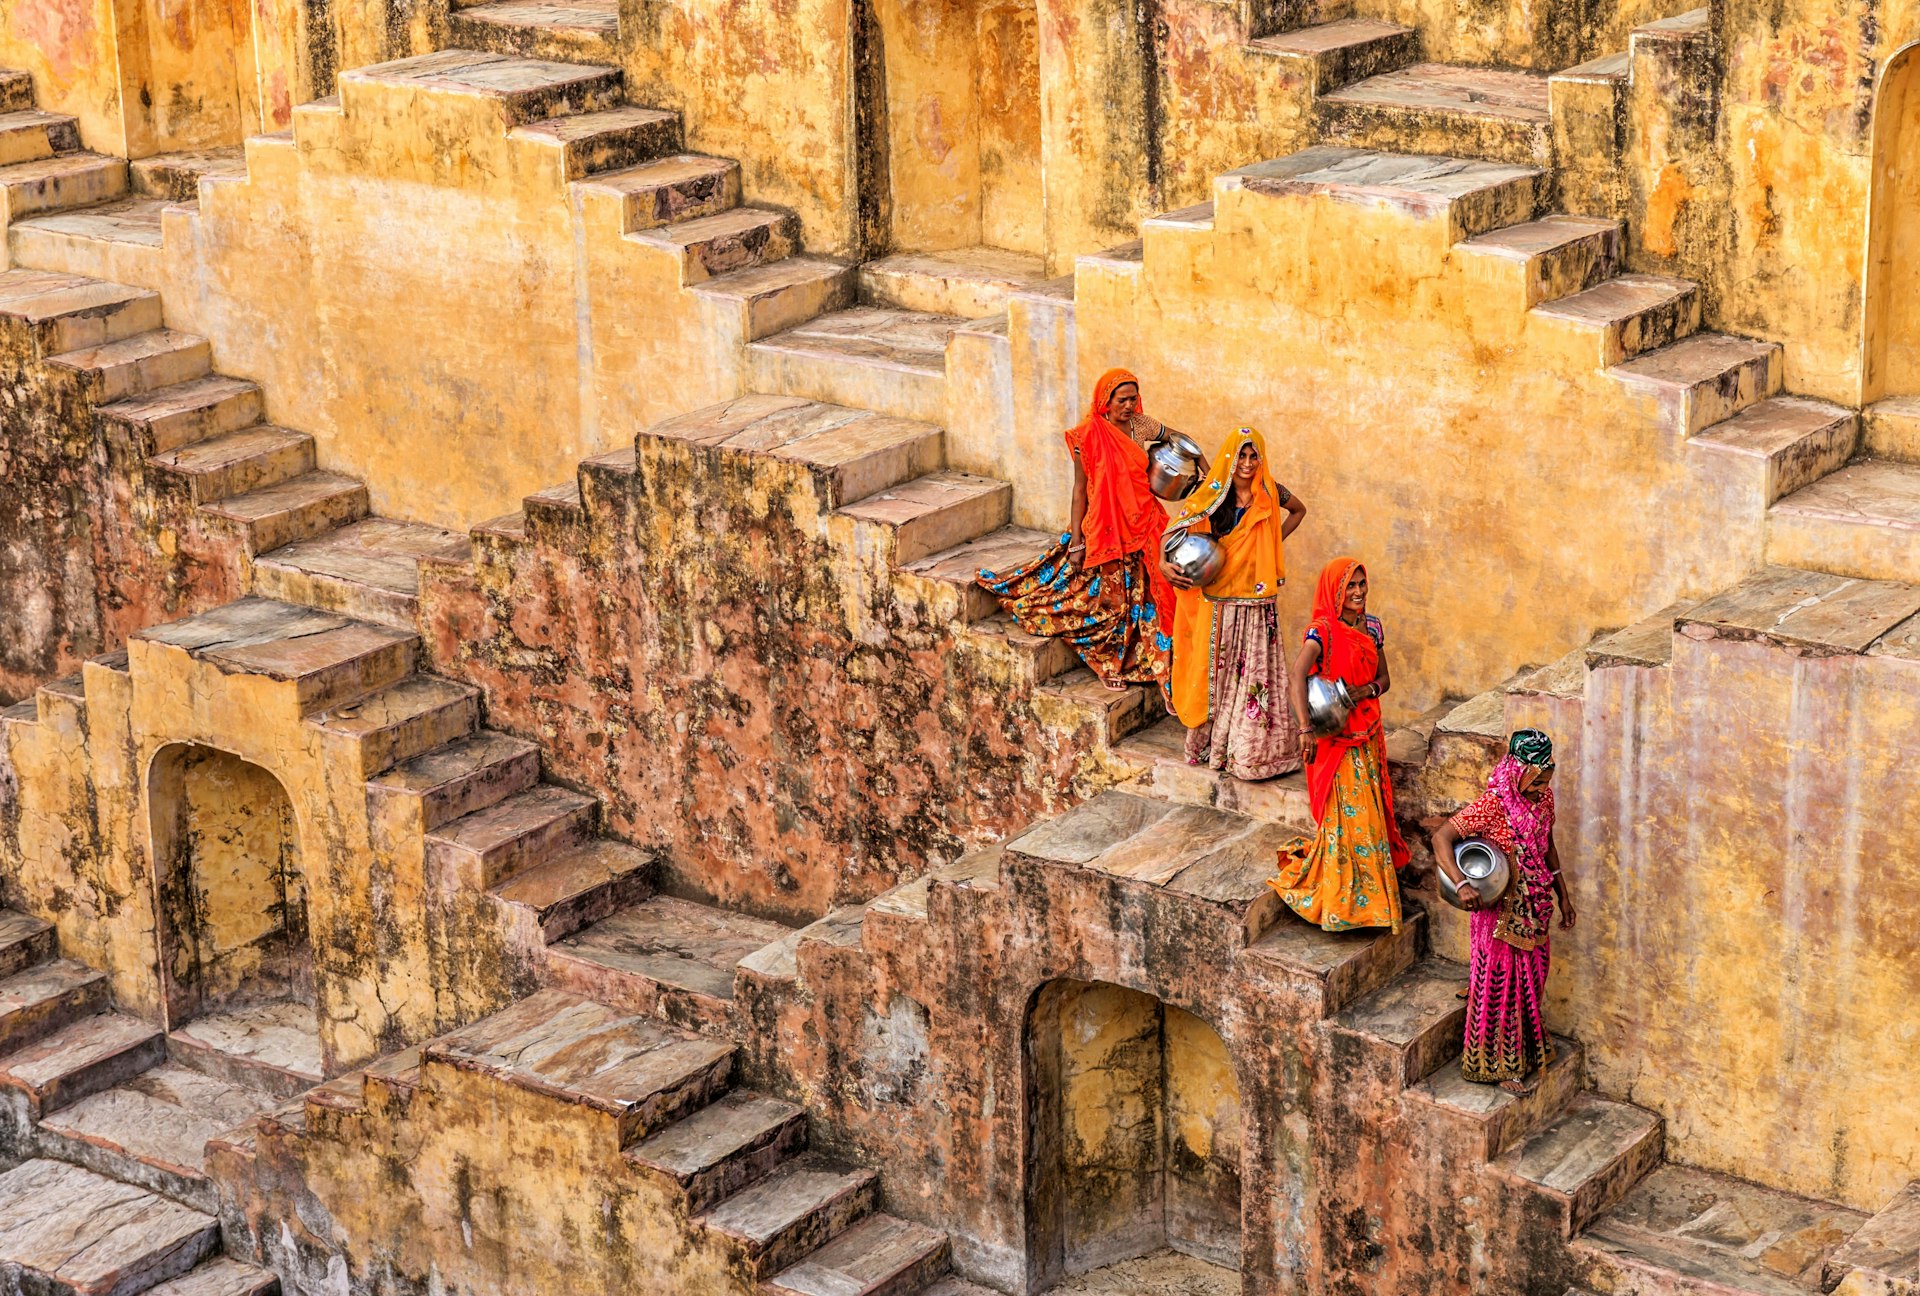 A posed picture of four women, carrying metallic pots, walking down the stairs of a stone stepwell in Rajasthan, India. The four women wear colourful saris that stand out against the stone background.